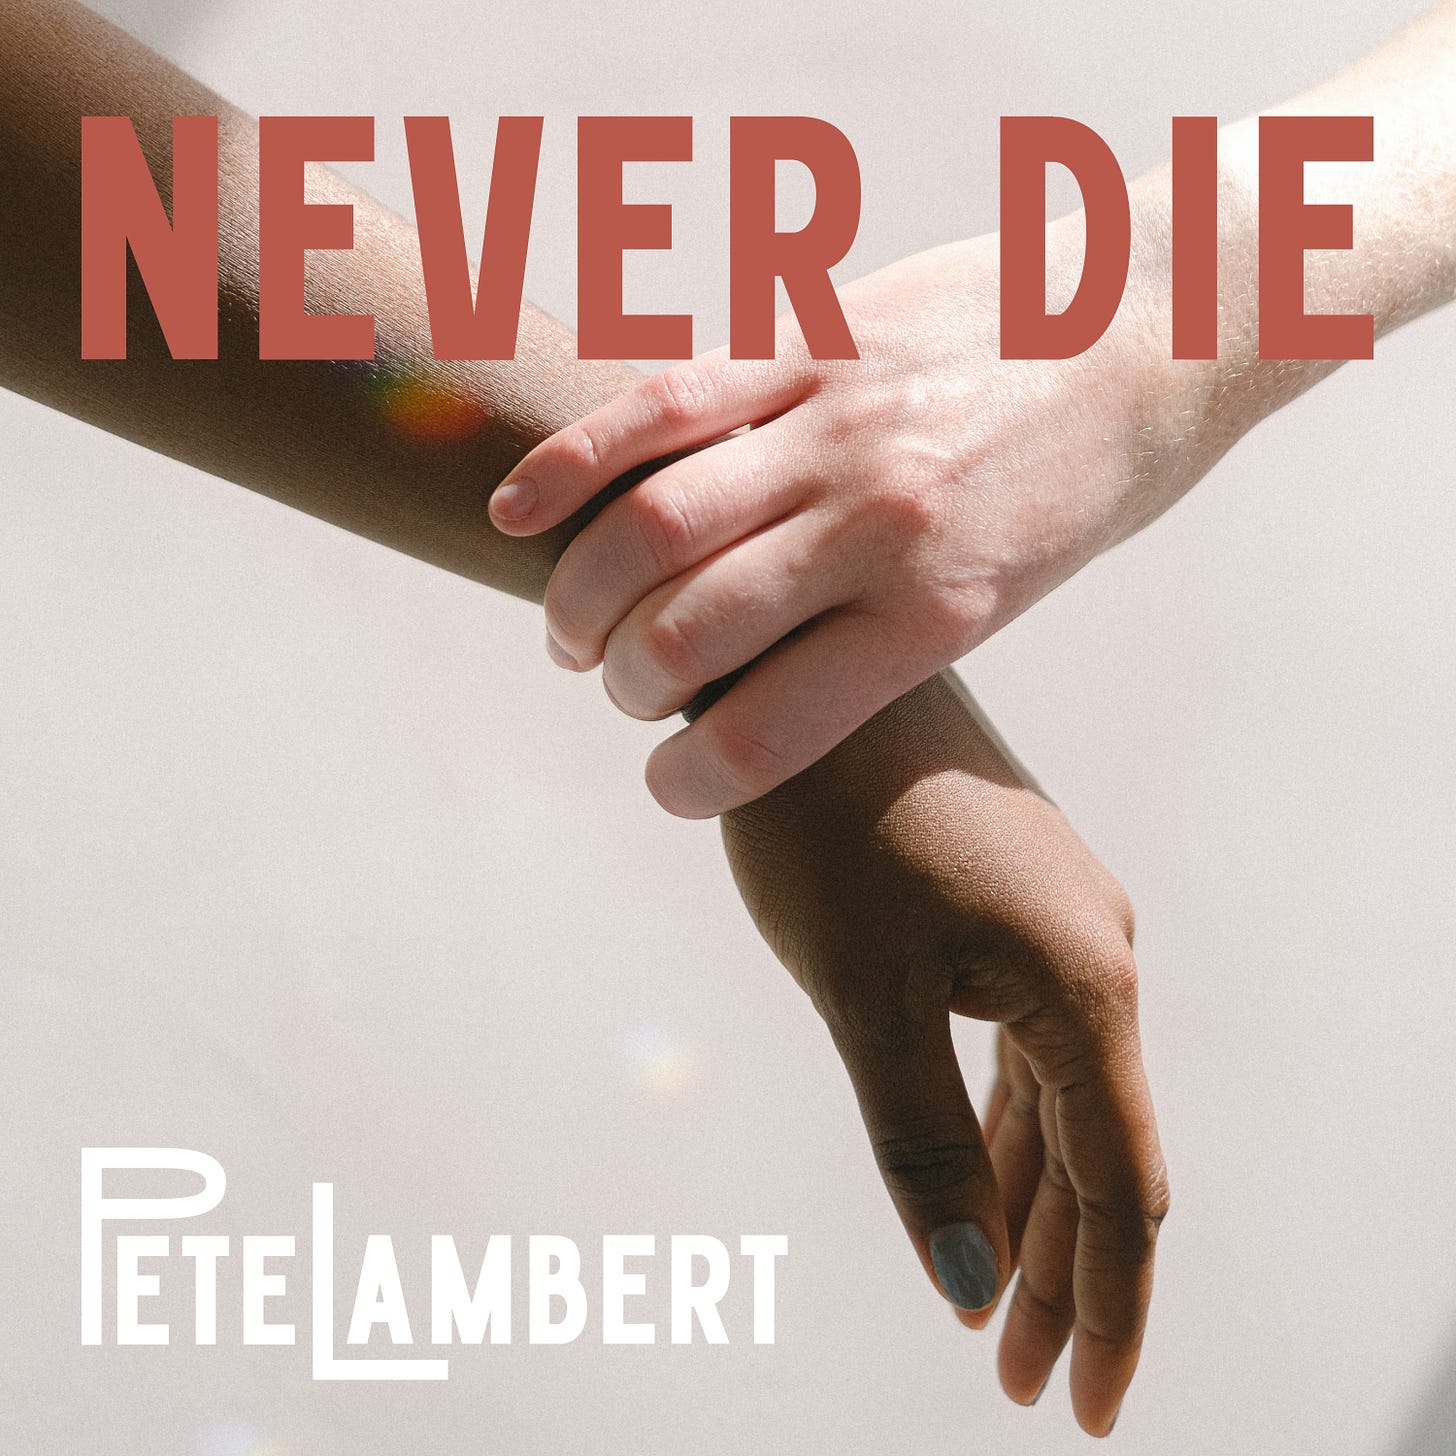 Never Die by Pete Lambert - CD Artwork. Two people's ands - one desperately holding onto the wrist of the other.